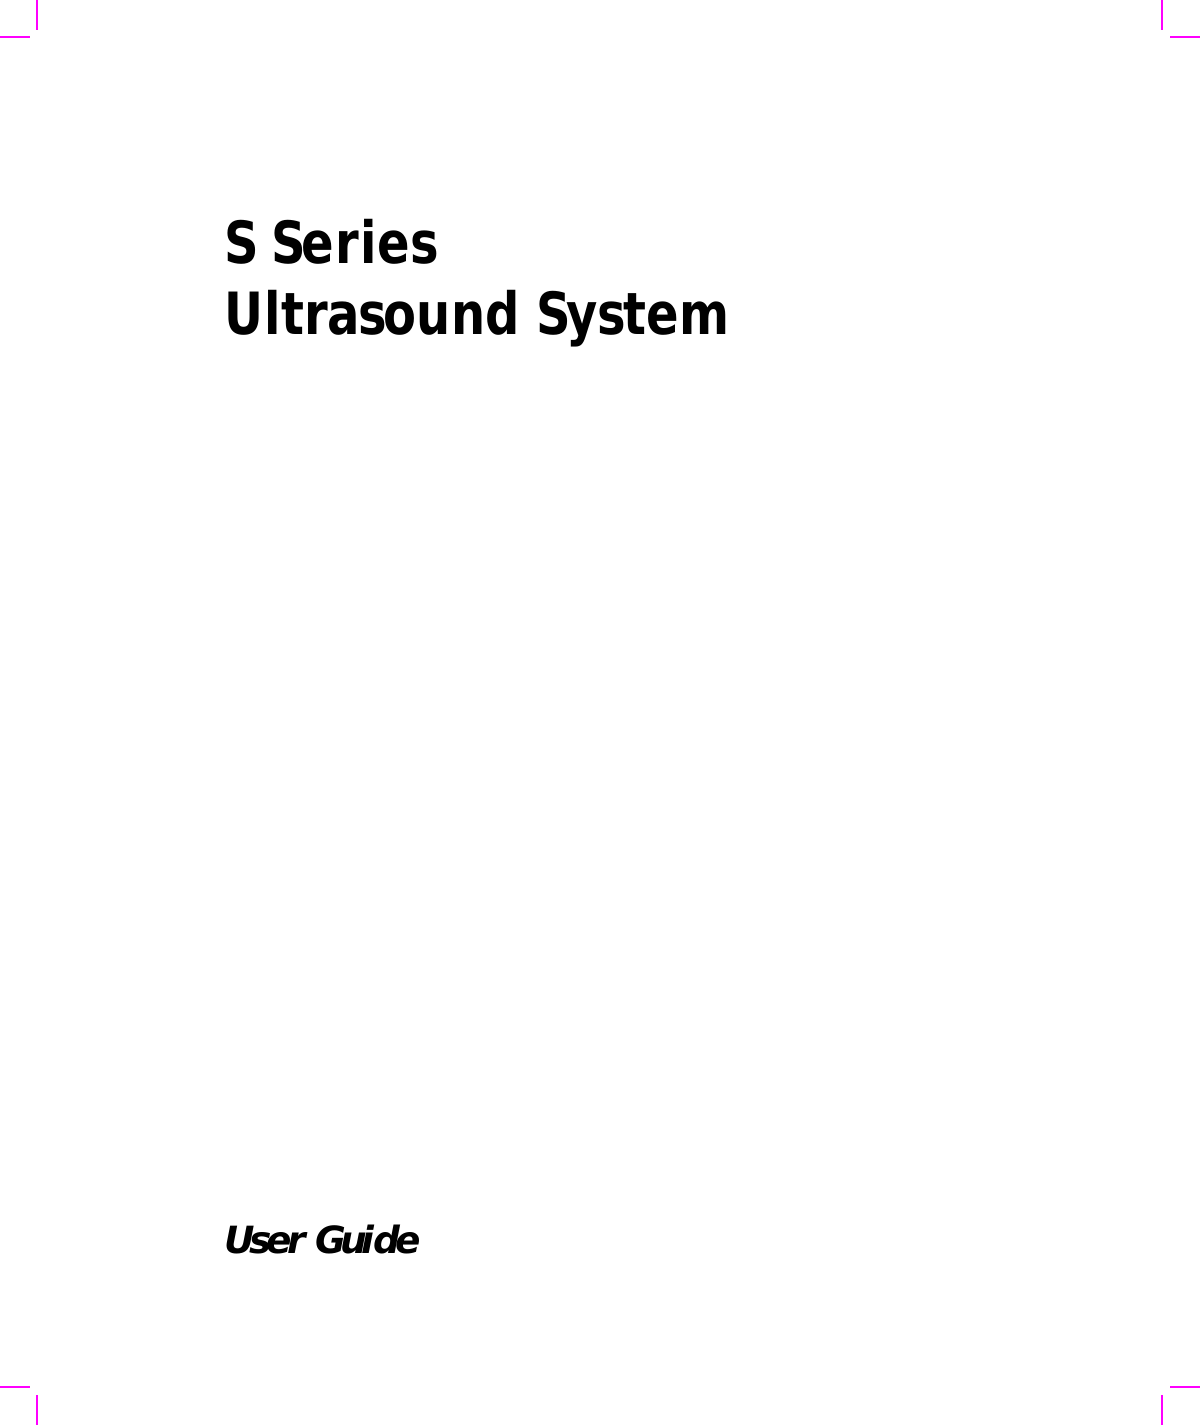 S Series Ultrasound SystemUser Guide